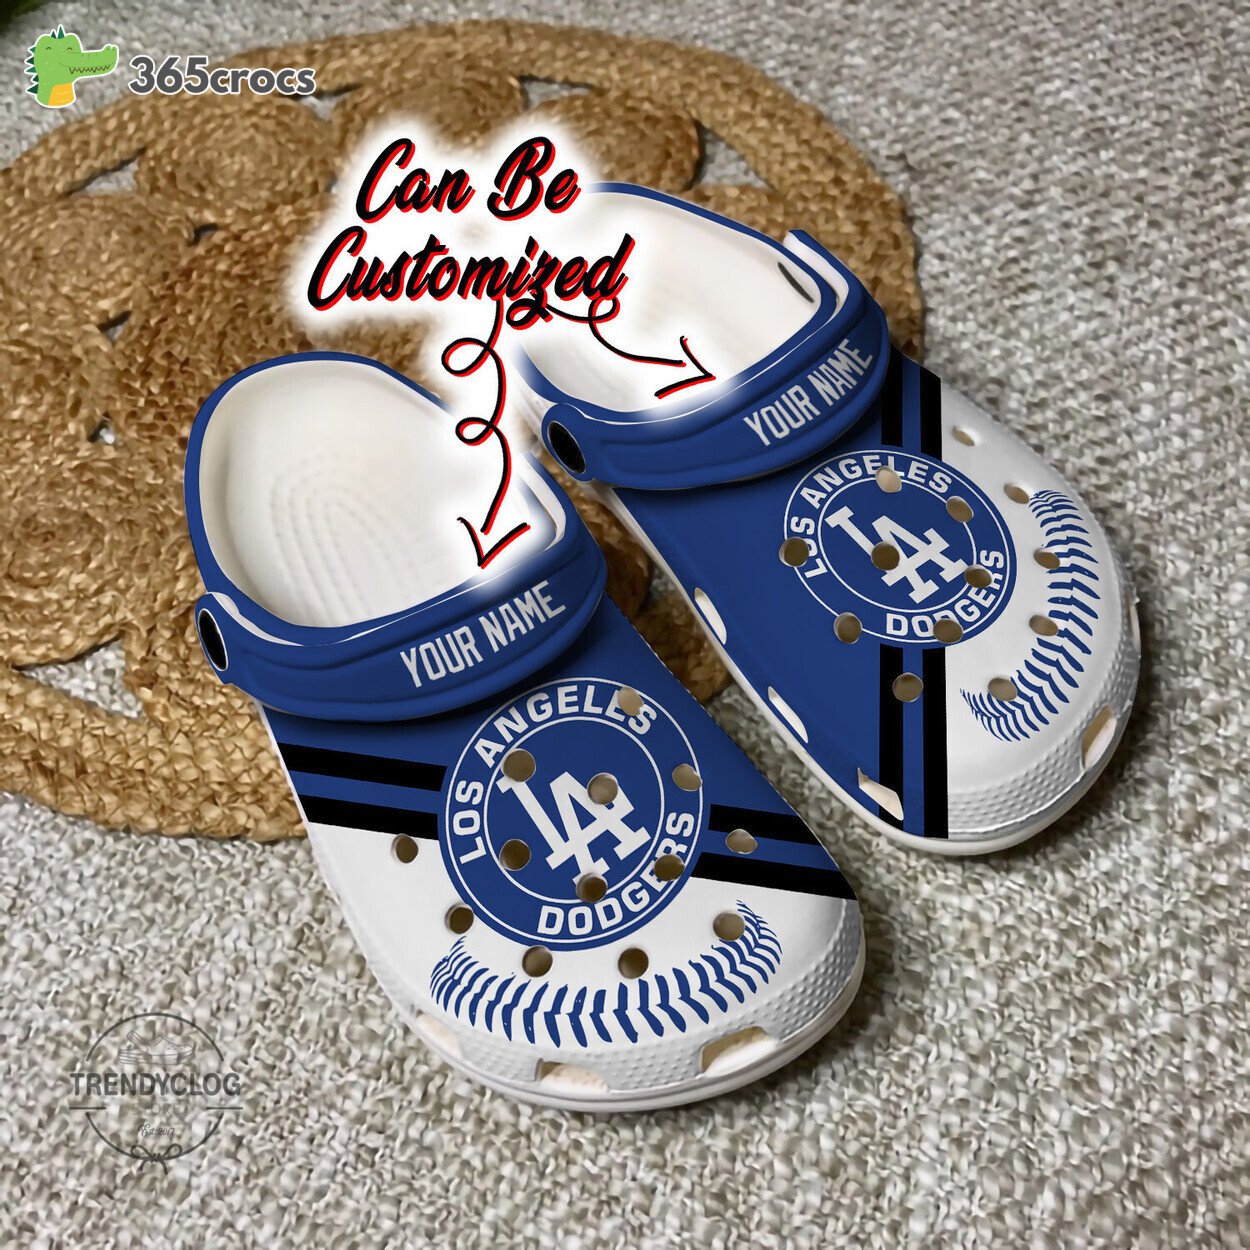 Los Angeles Dodgers Personalized Baseball Team Clog Shoes